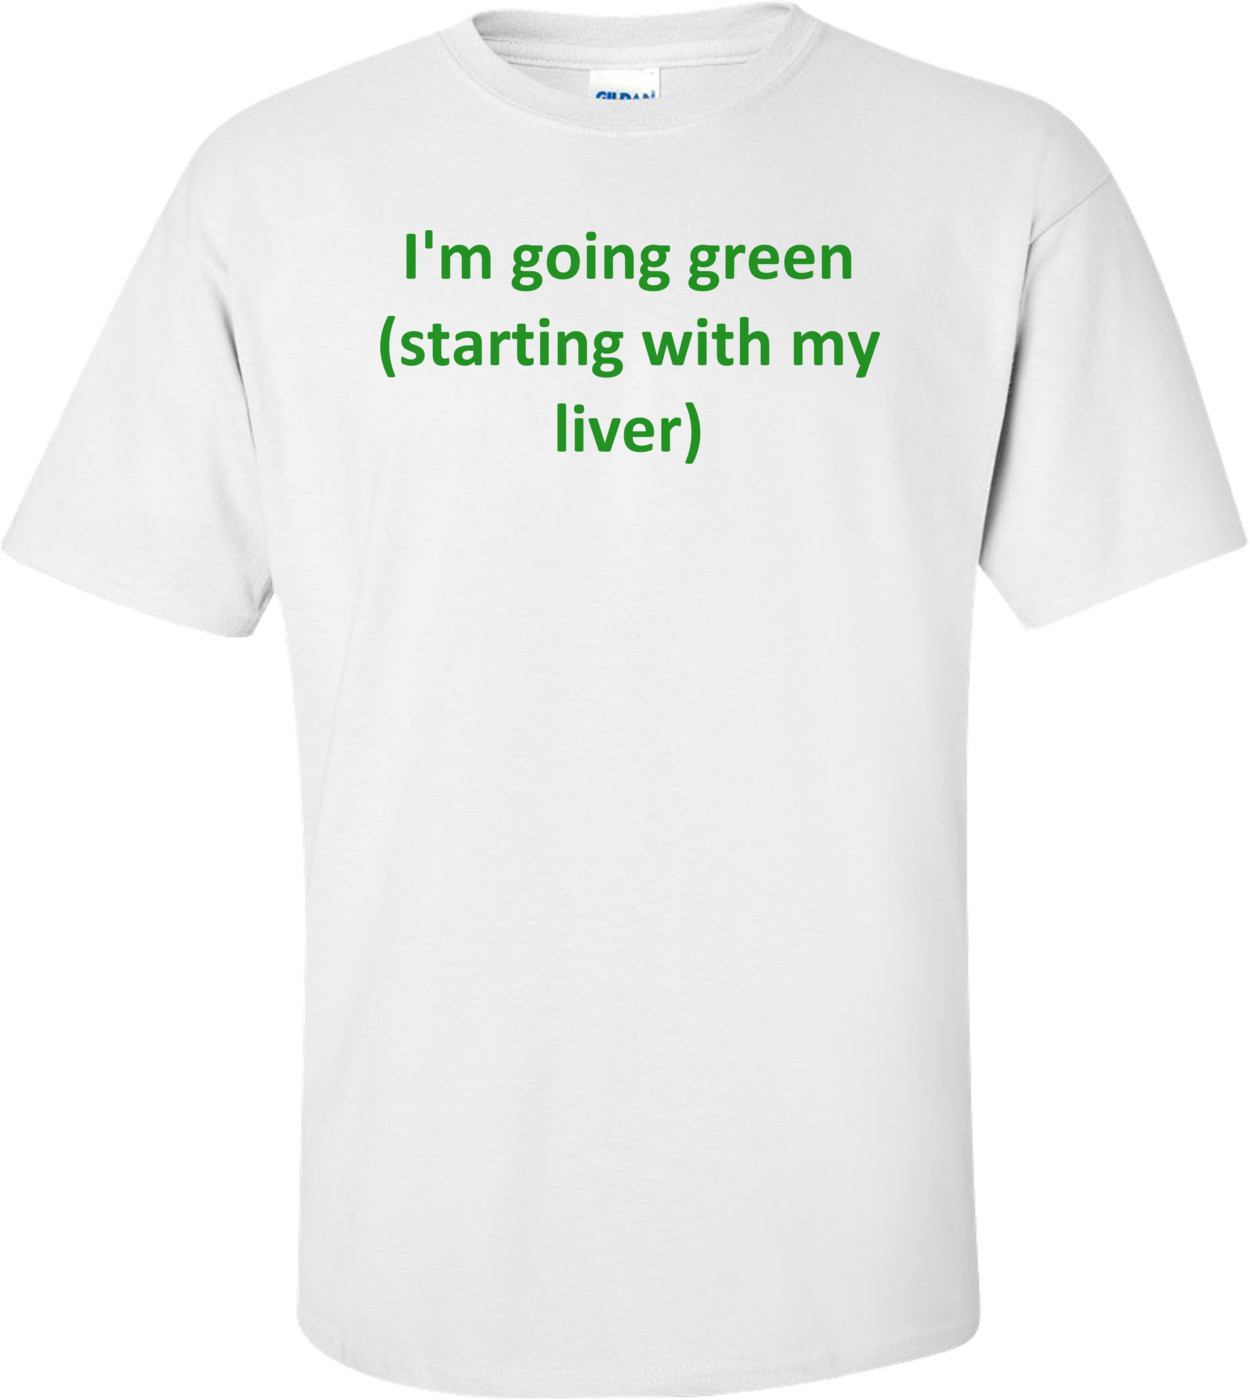 I'm going green (starting with my liver) Shirt